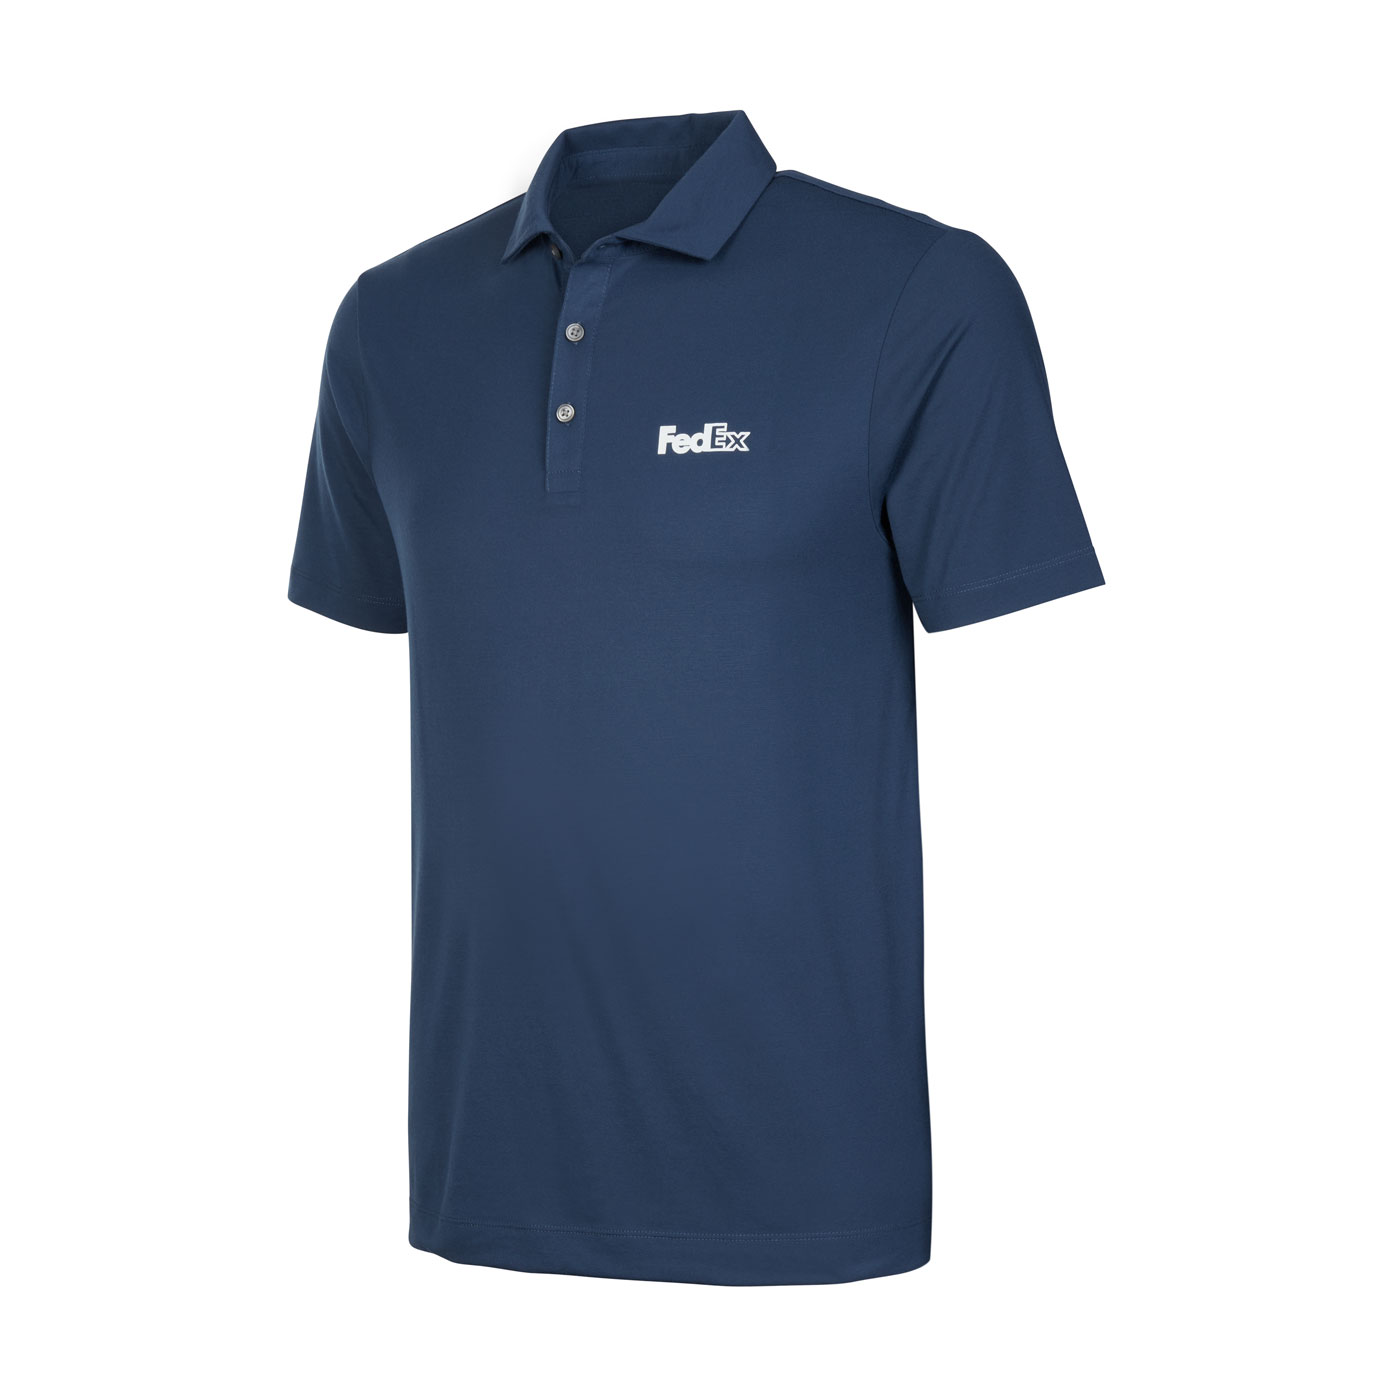 FedEx Mercer+Mettle™ Stretch Jersey Polo | The FedEx Company Store